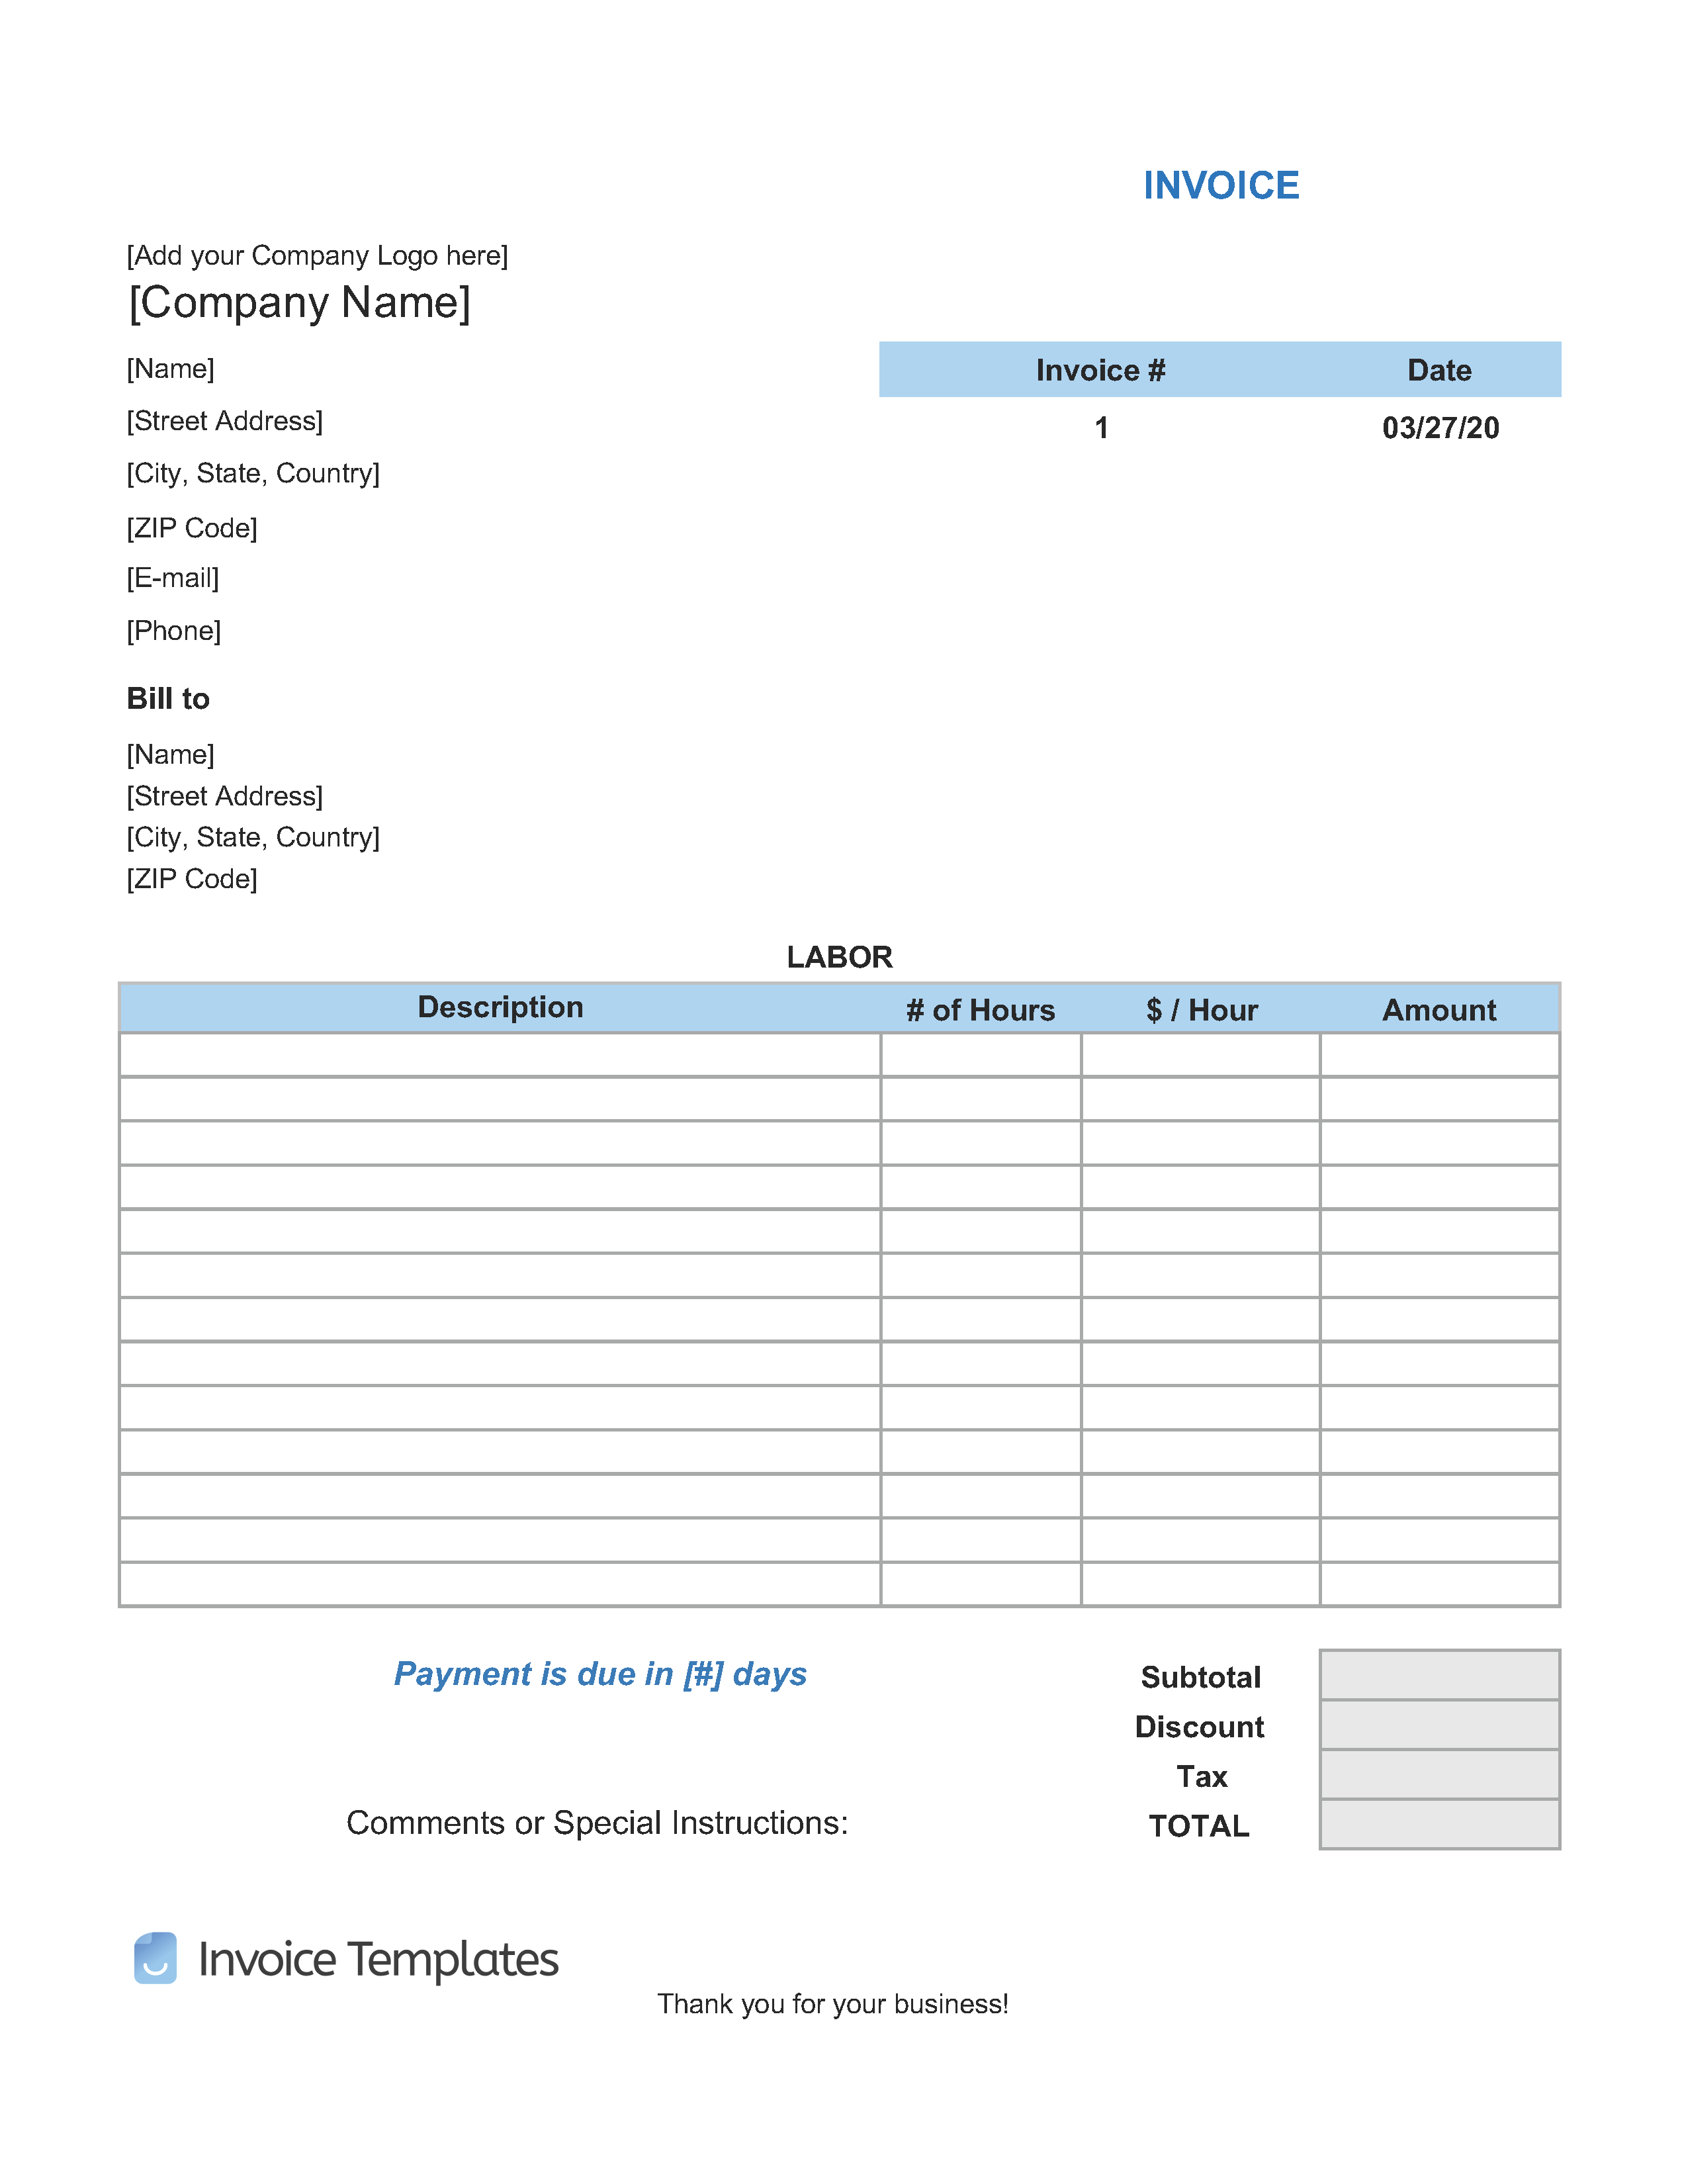 Download Excel Invoice Template from invoicetemplates.com